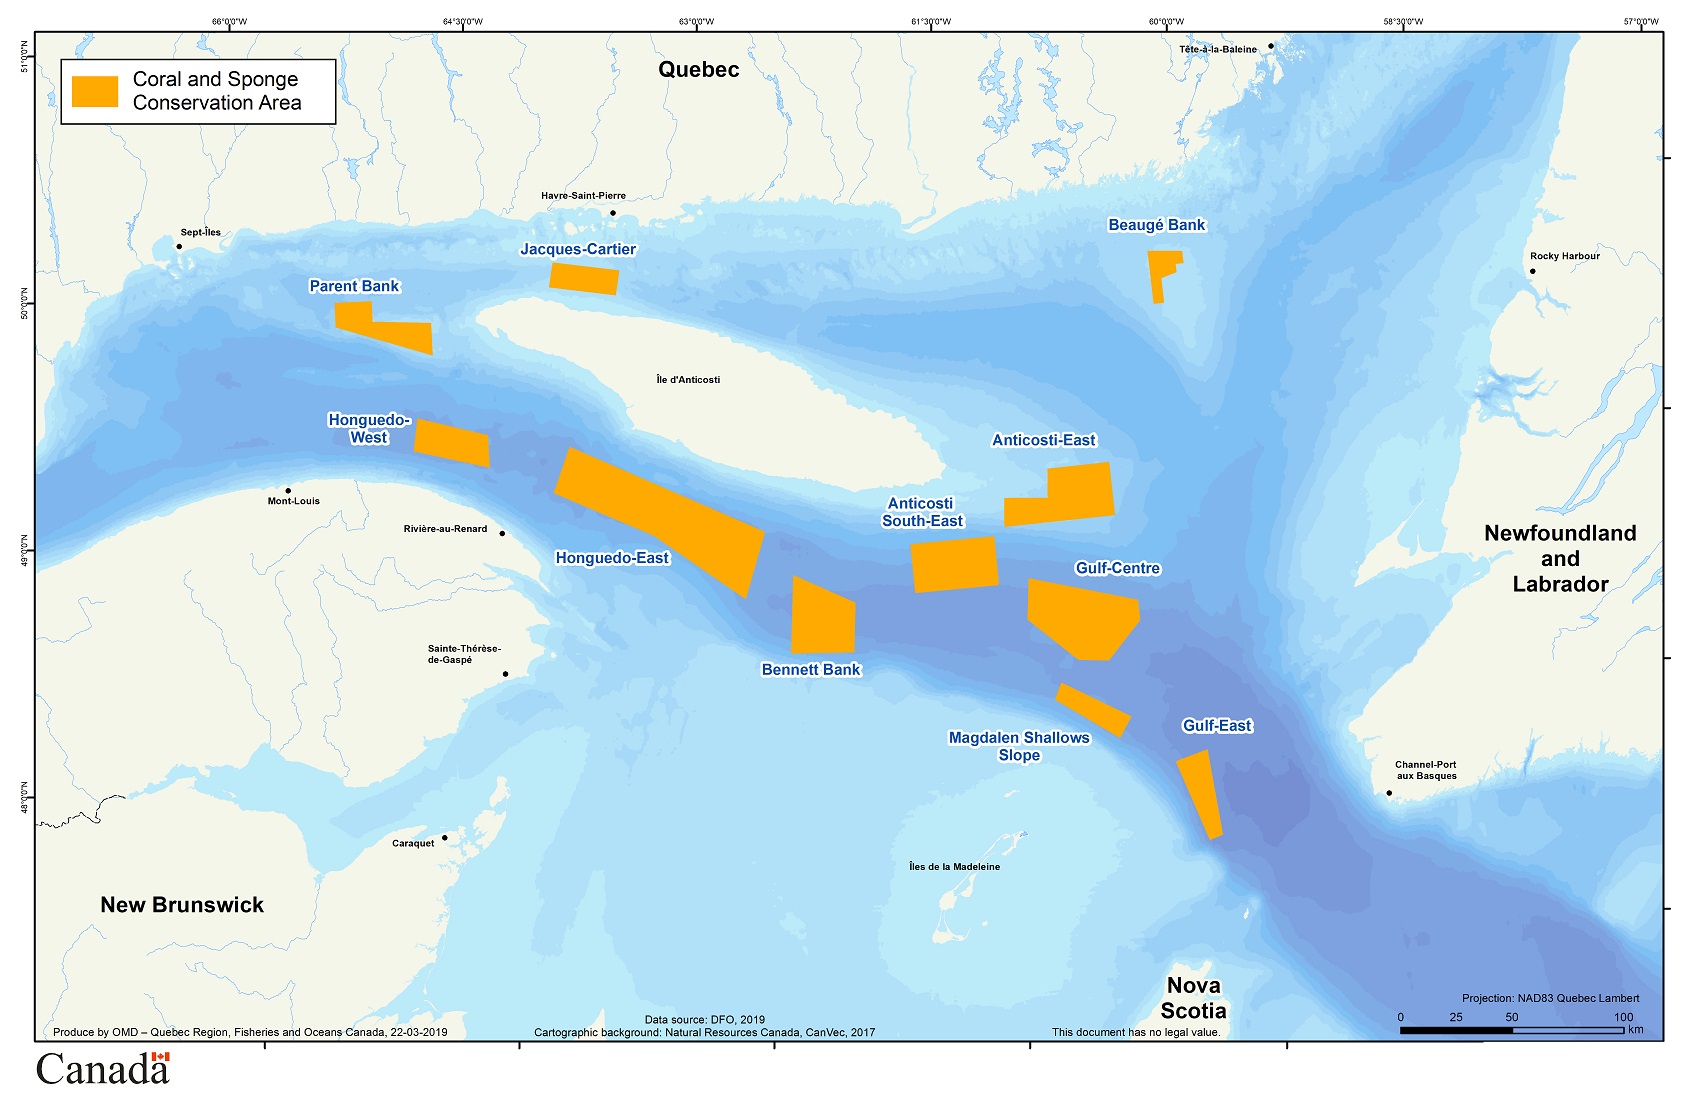 Map: The 11 coral and sponge conservation areas in the Estuary and Gulf of St. Lawrence